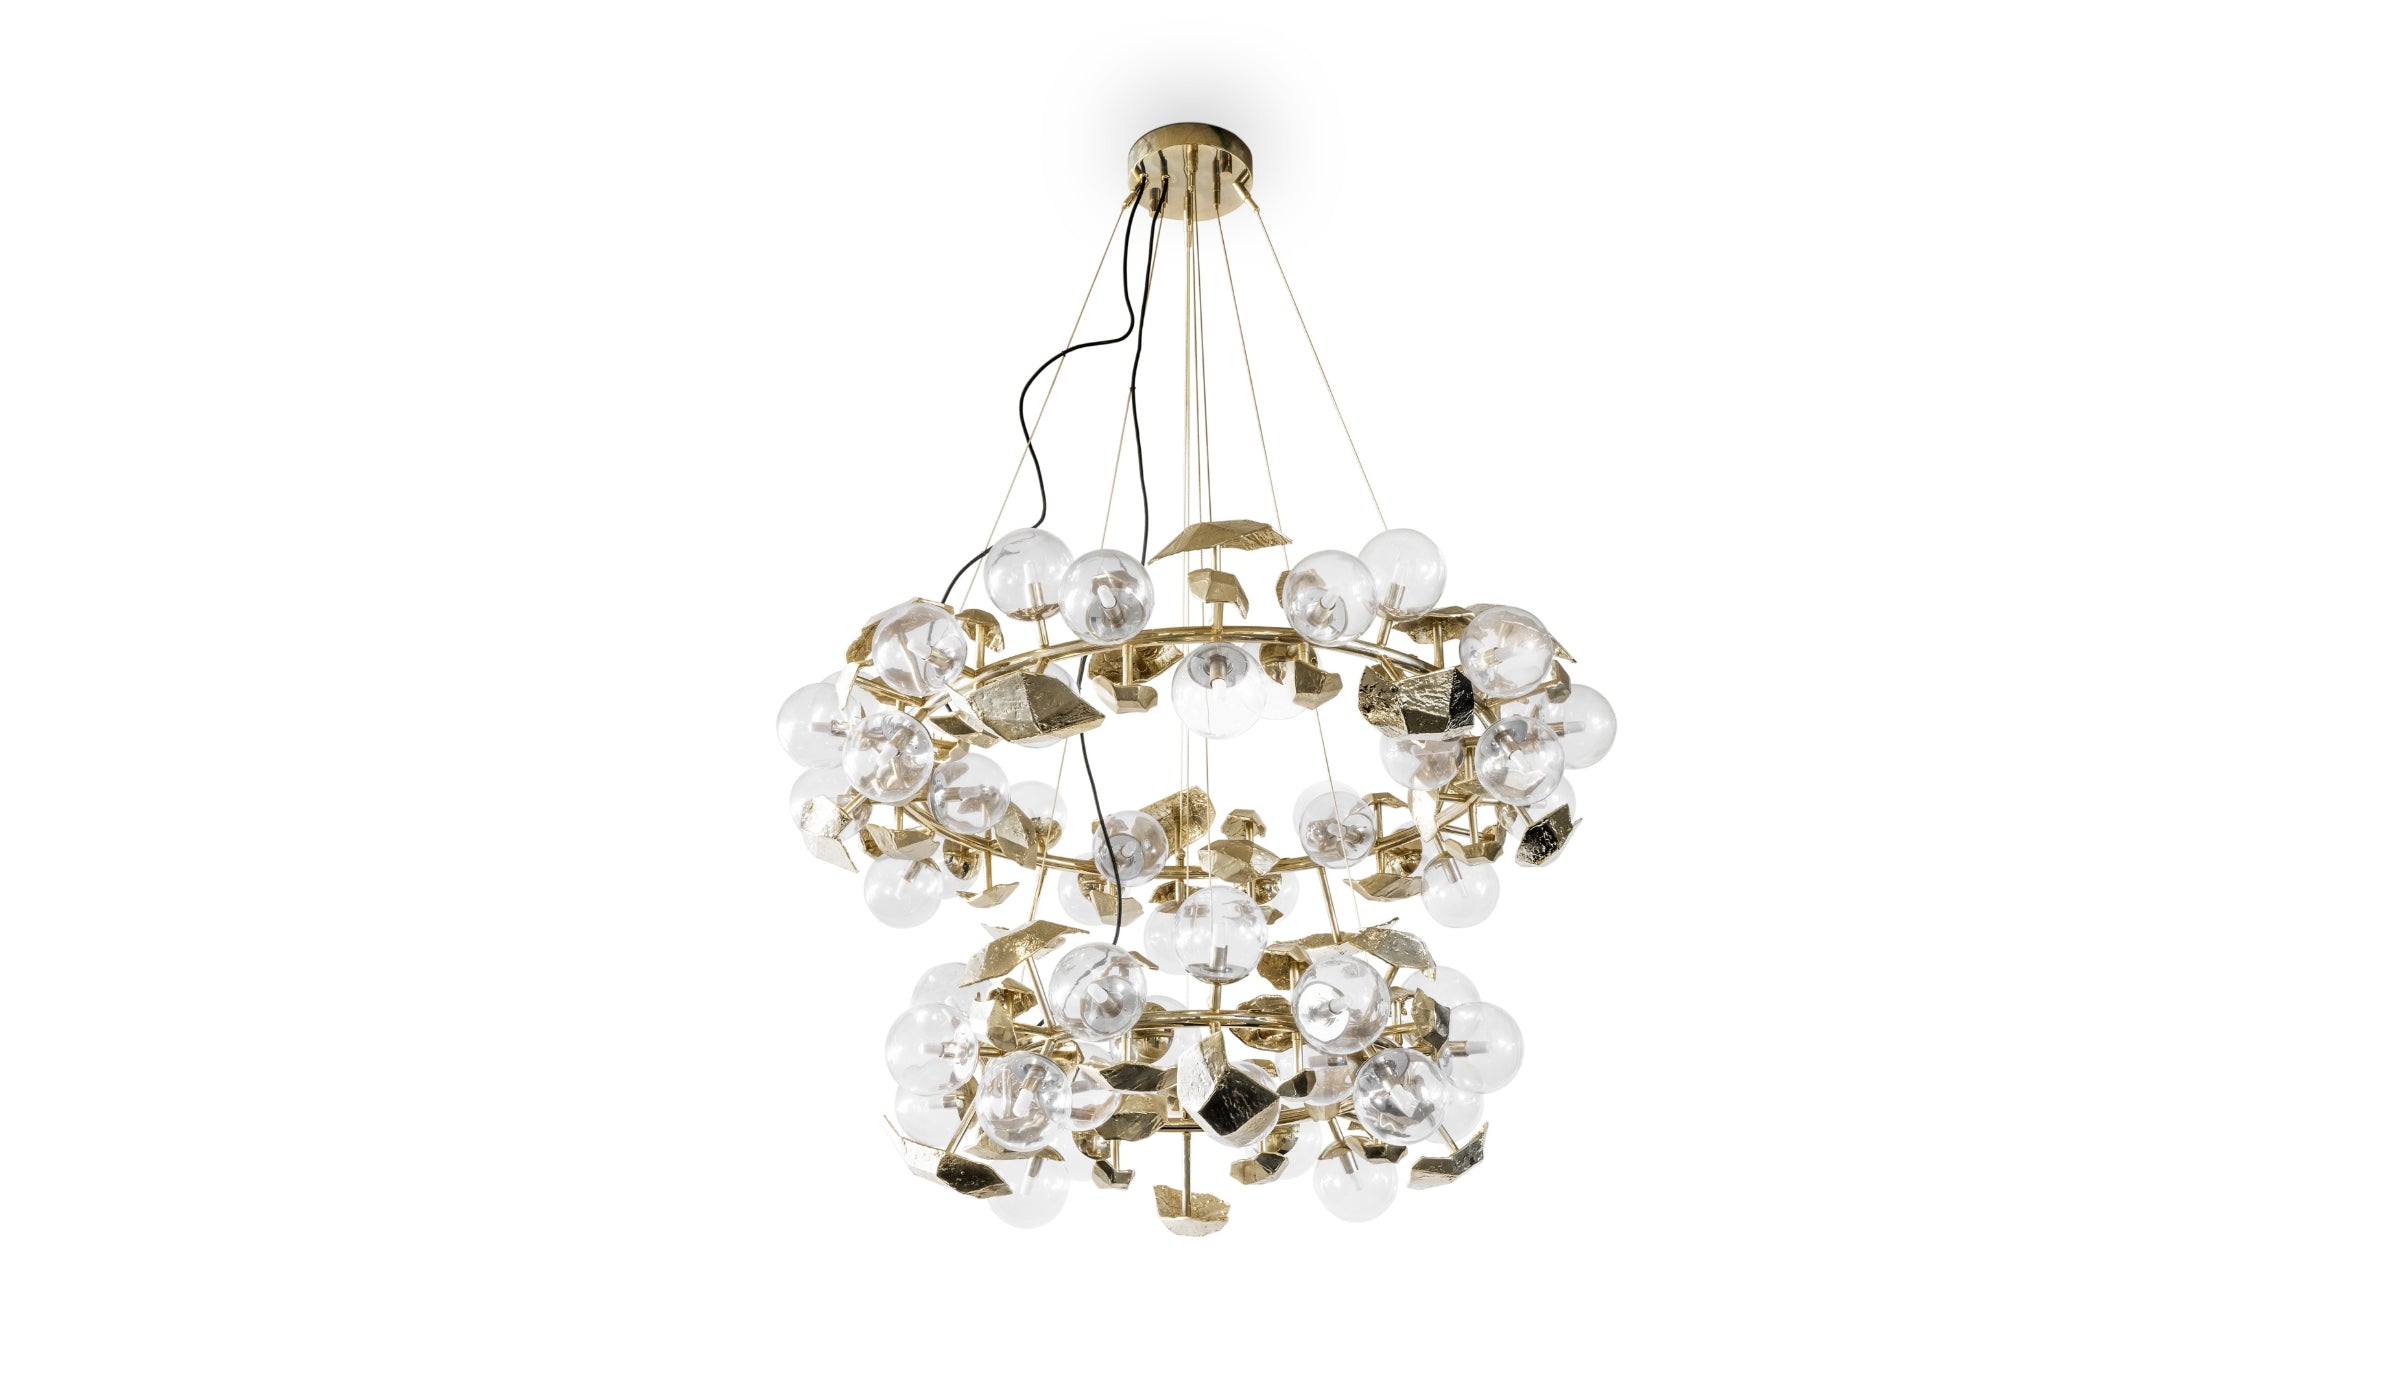 Hera round II - Luxurious pendant lamp in brass and glass for sophisticated decoration